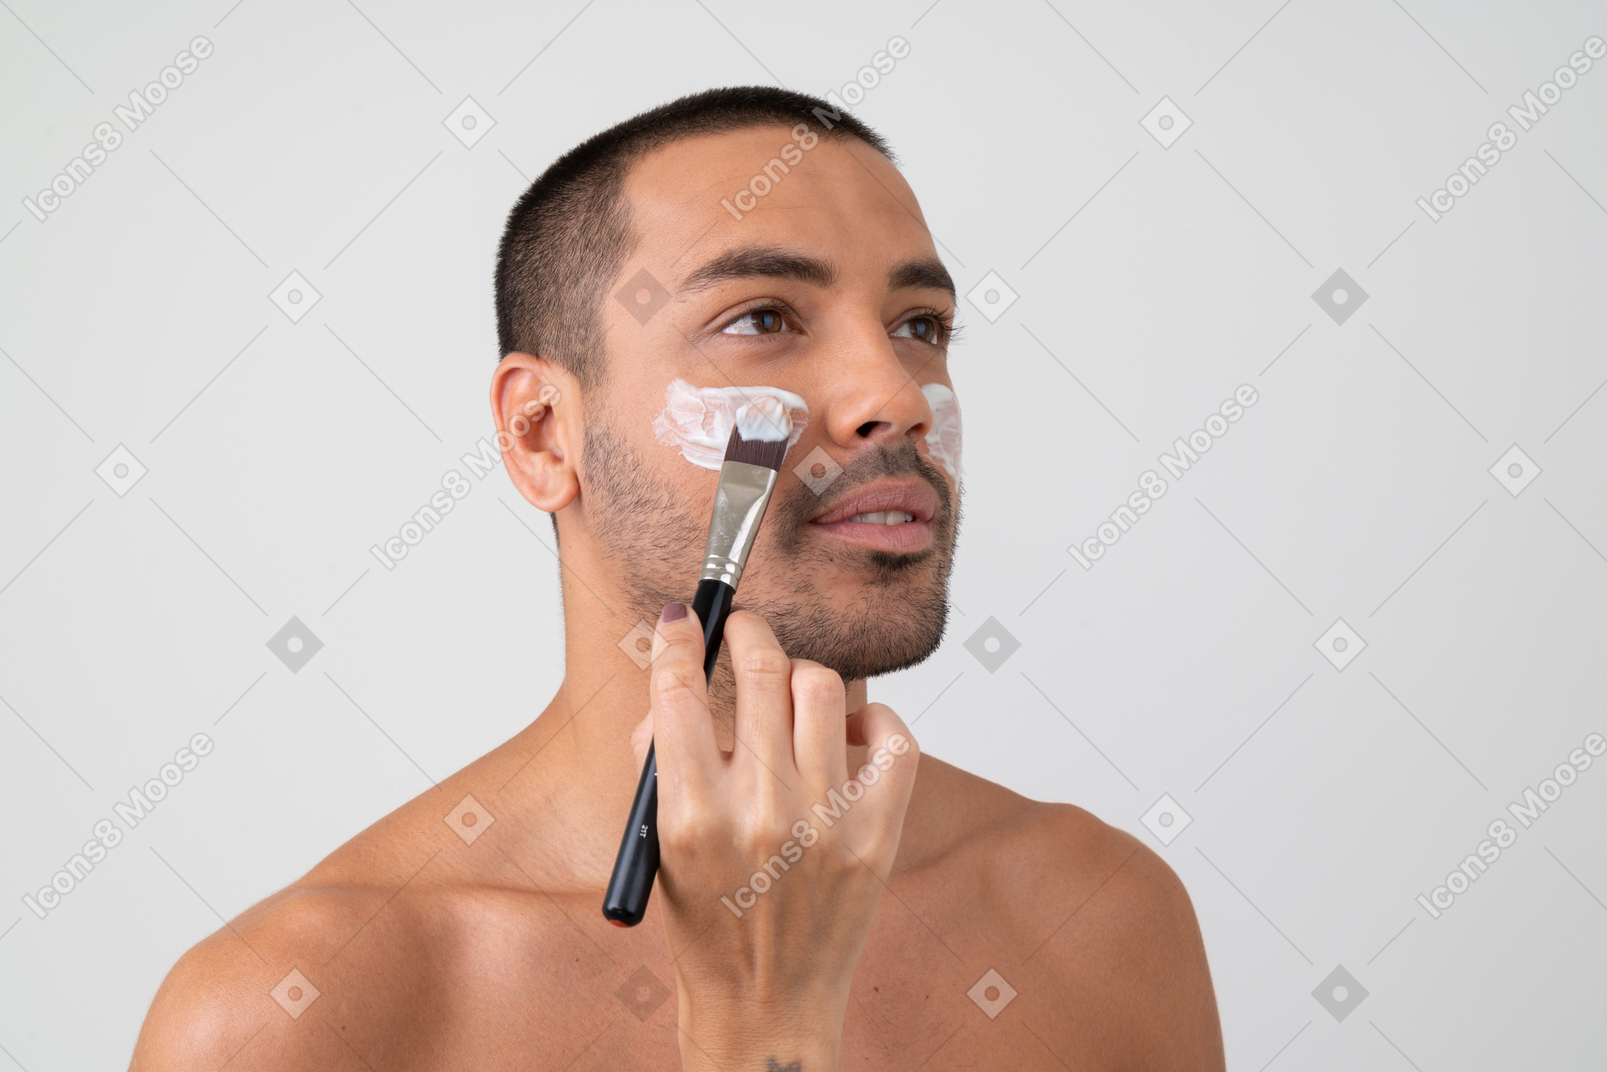 Beauty procedures before get out to the world